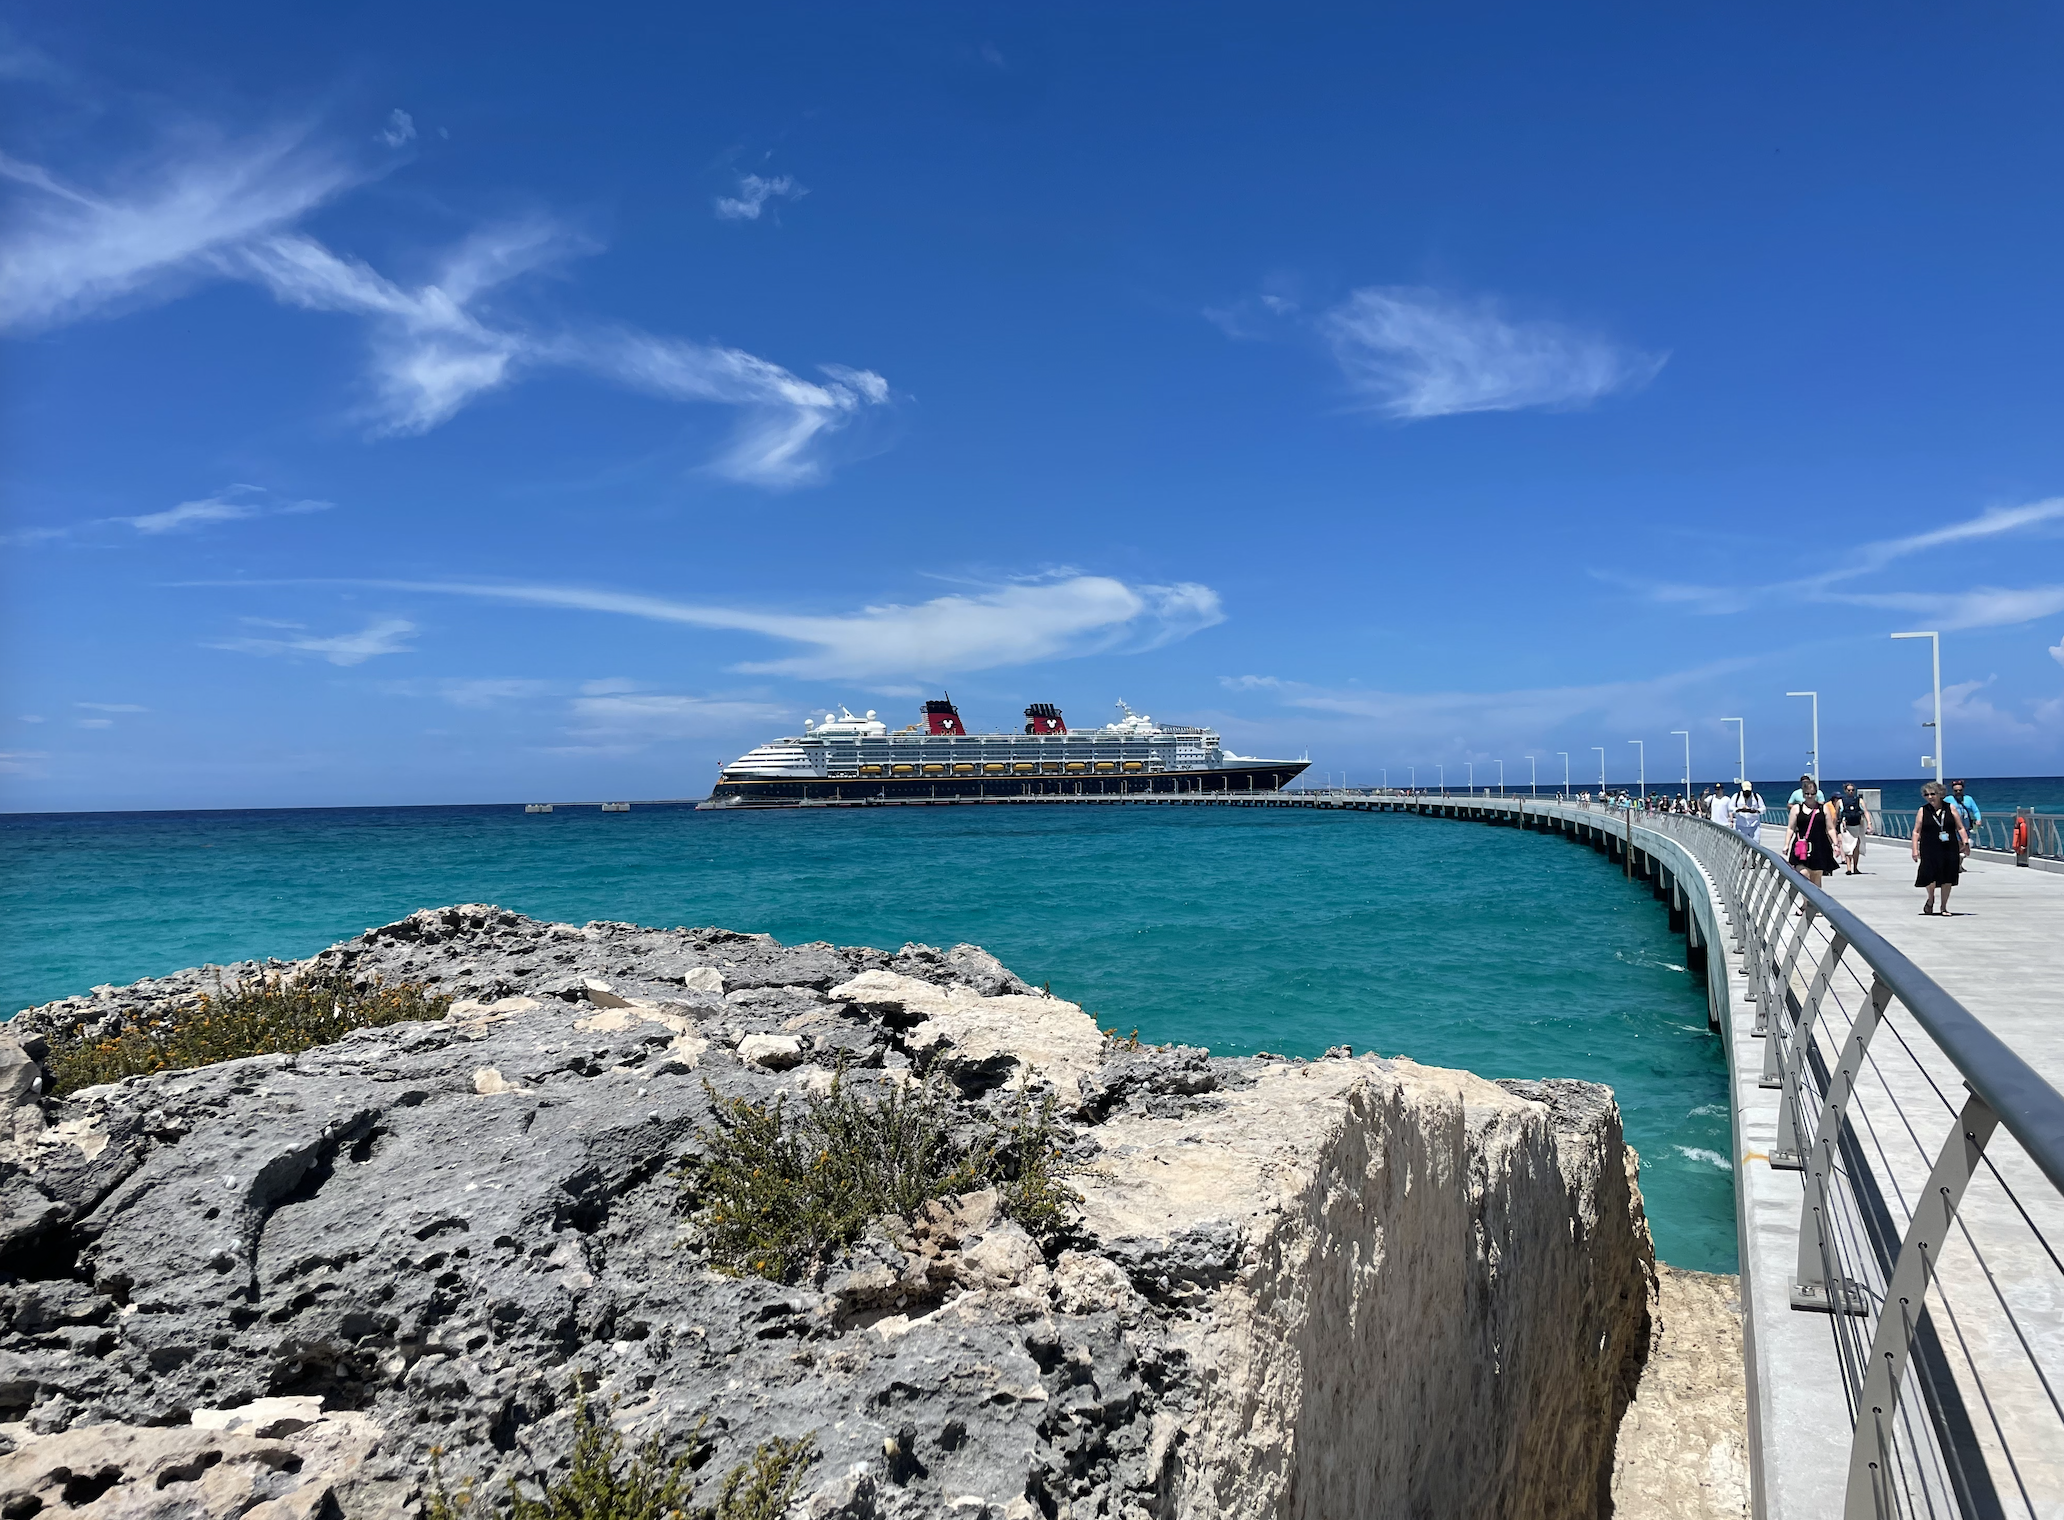 Cruise ship in distance on turquoise ocean, docked at a pier with people walking towards it. Rocky outcrop in foreground under clear sky